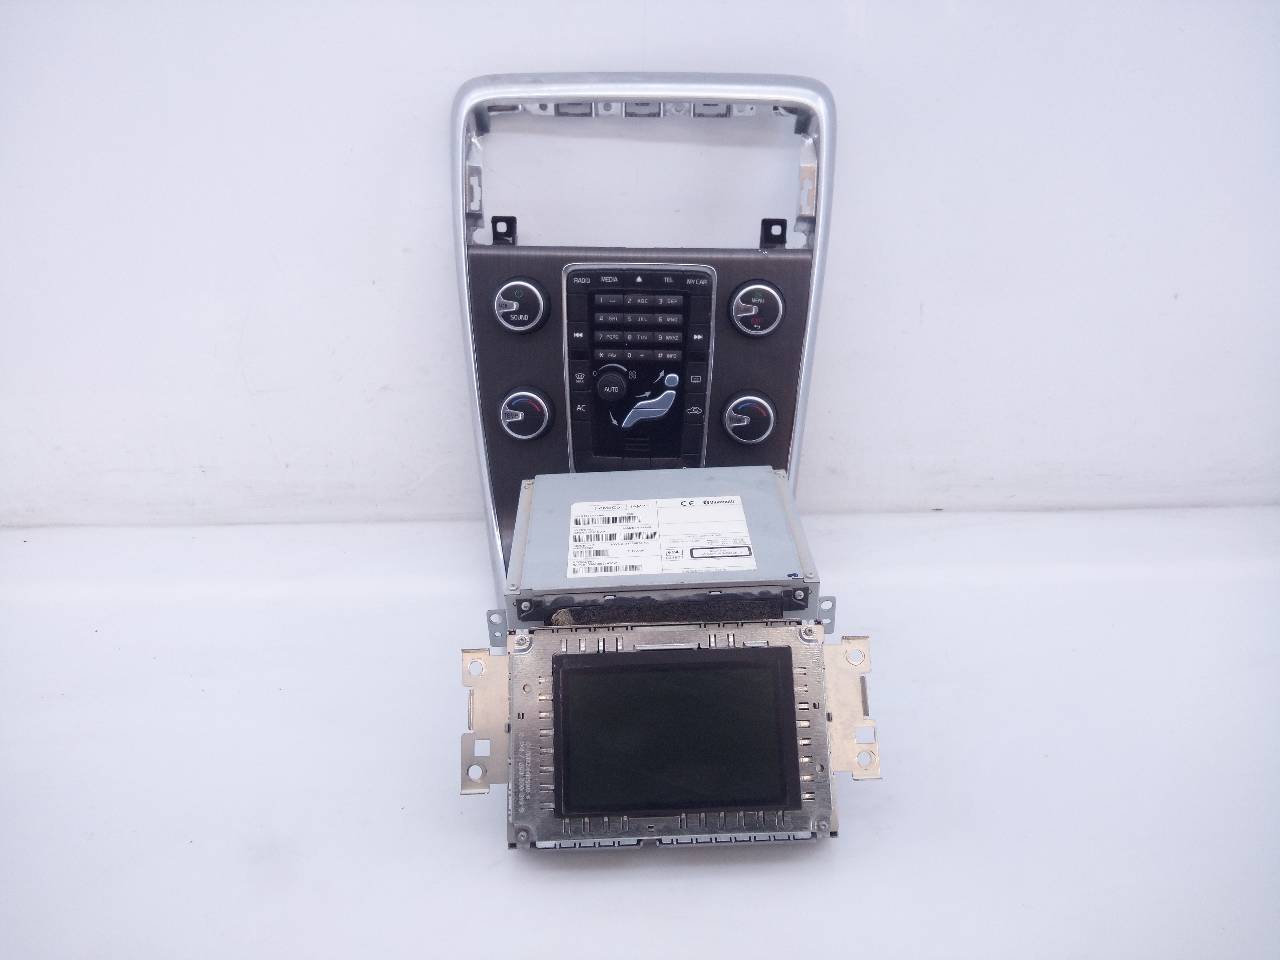 VOLVO 1 generation (2000-2009) Music Player Without GPS 31328307, 31328803AA, E3-B5-48-2 18507003